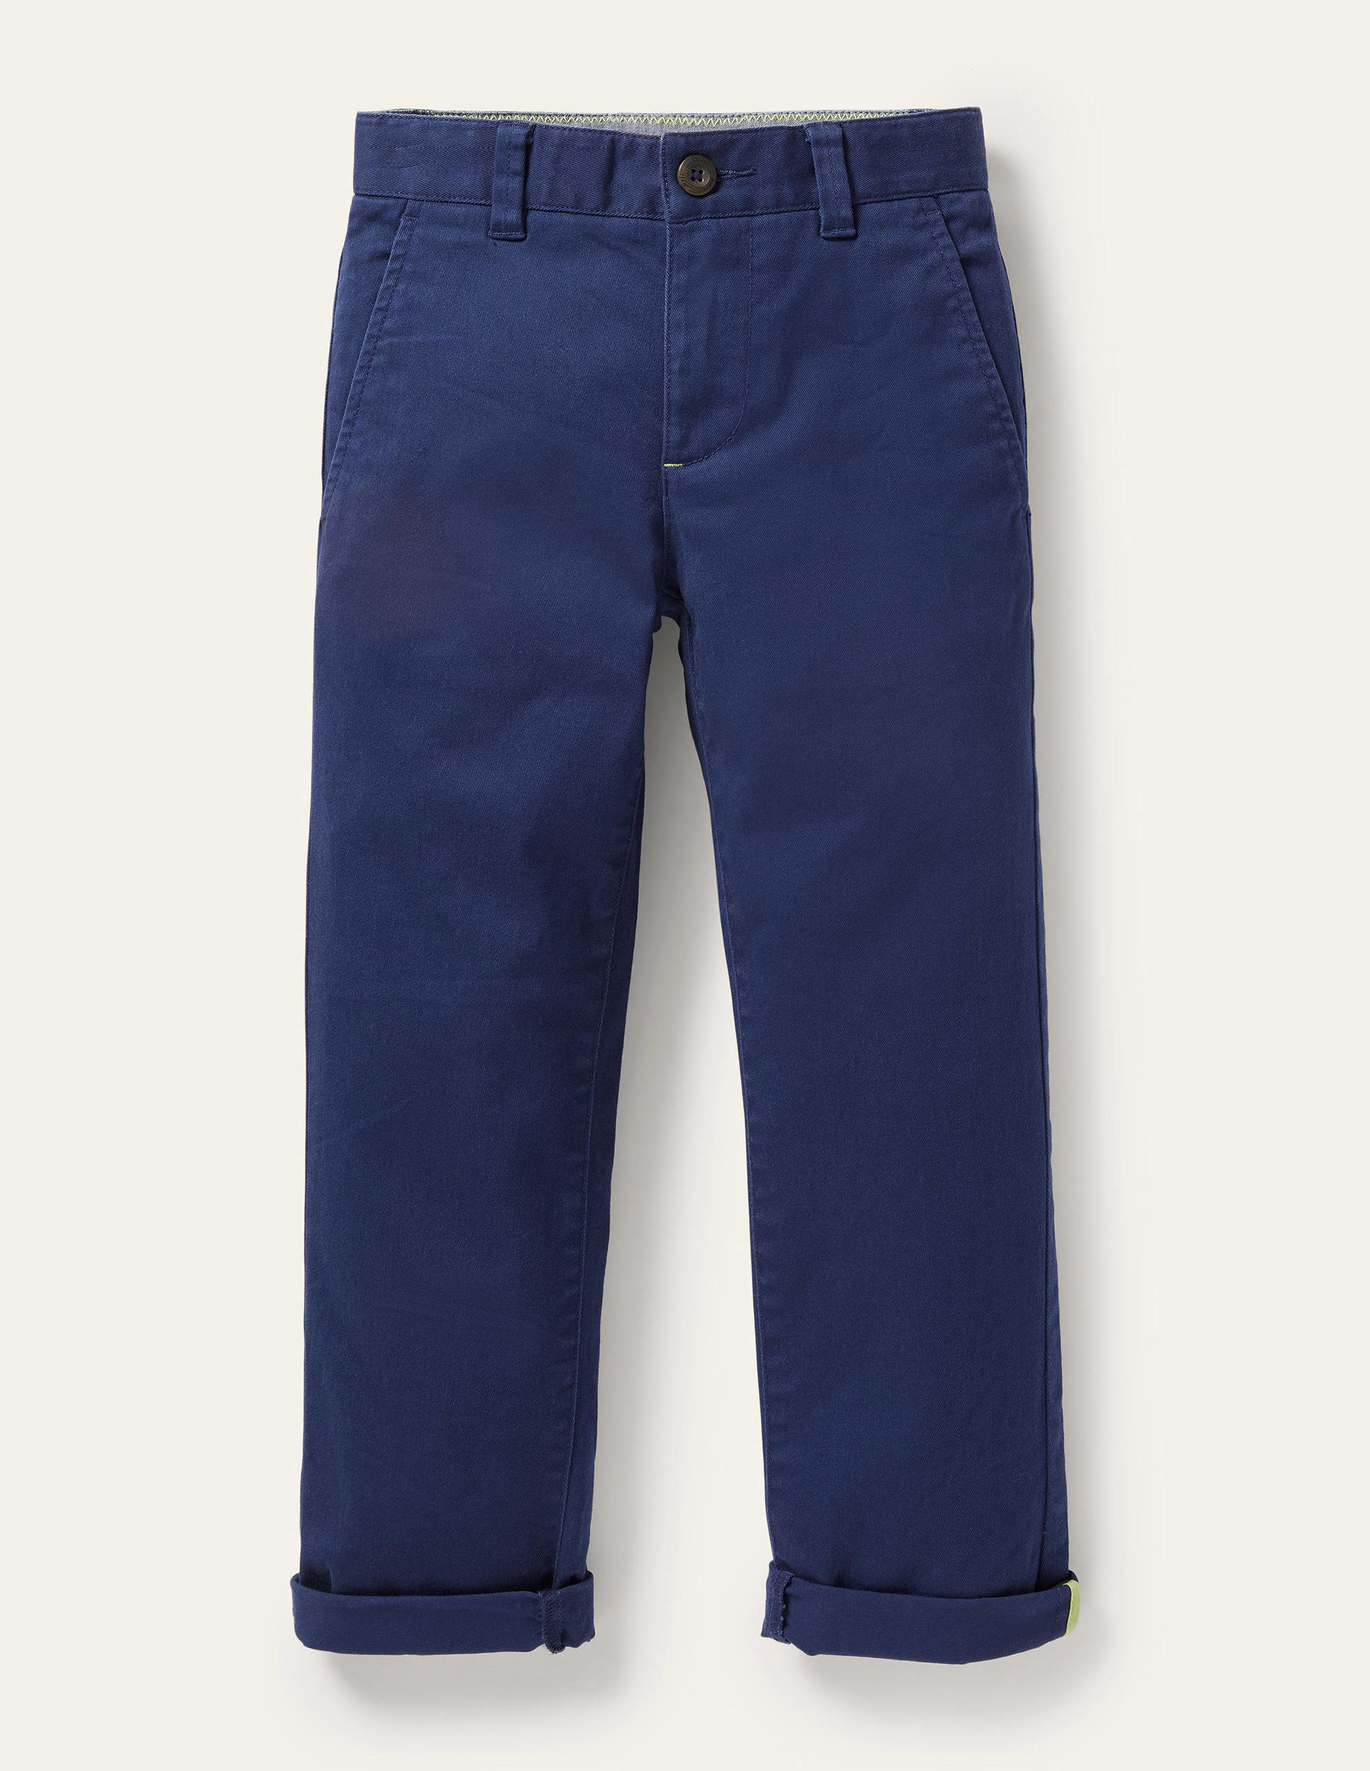 Boden Chino Stretch Pants - College Navy